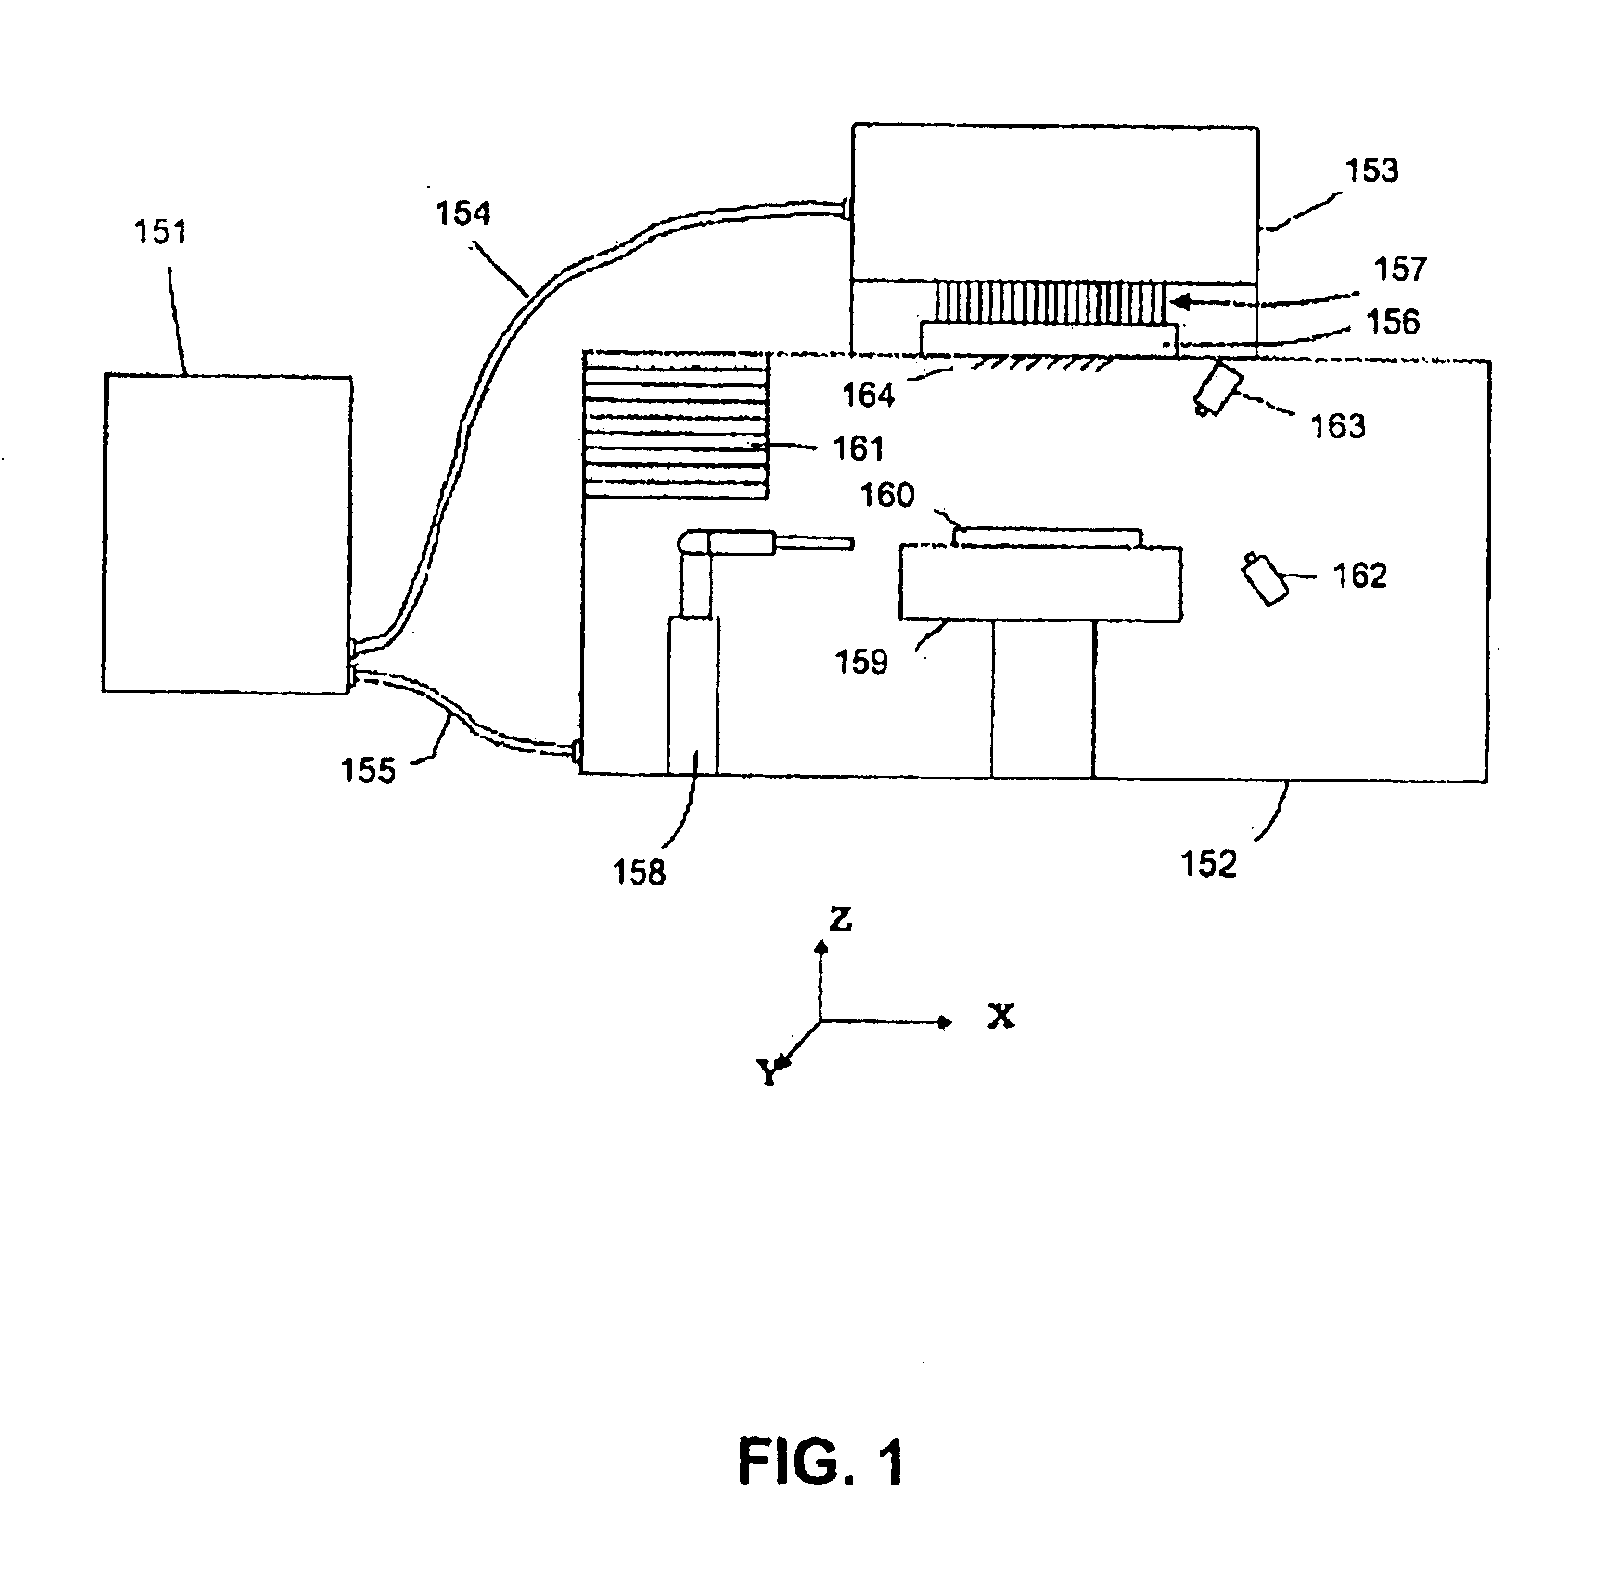 Apparatus and method for electromechanical testing and validation of probe cards